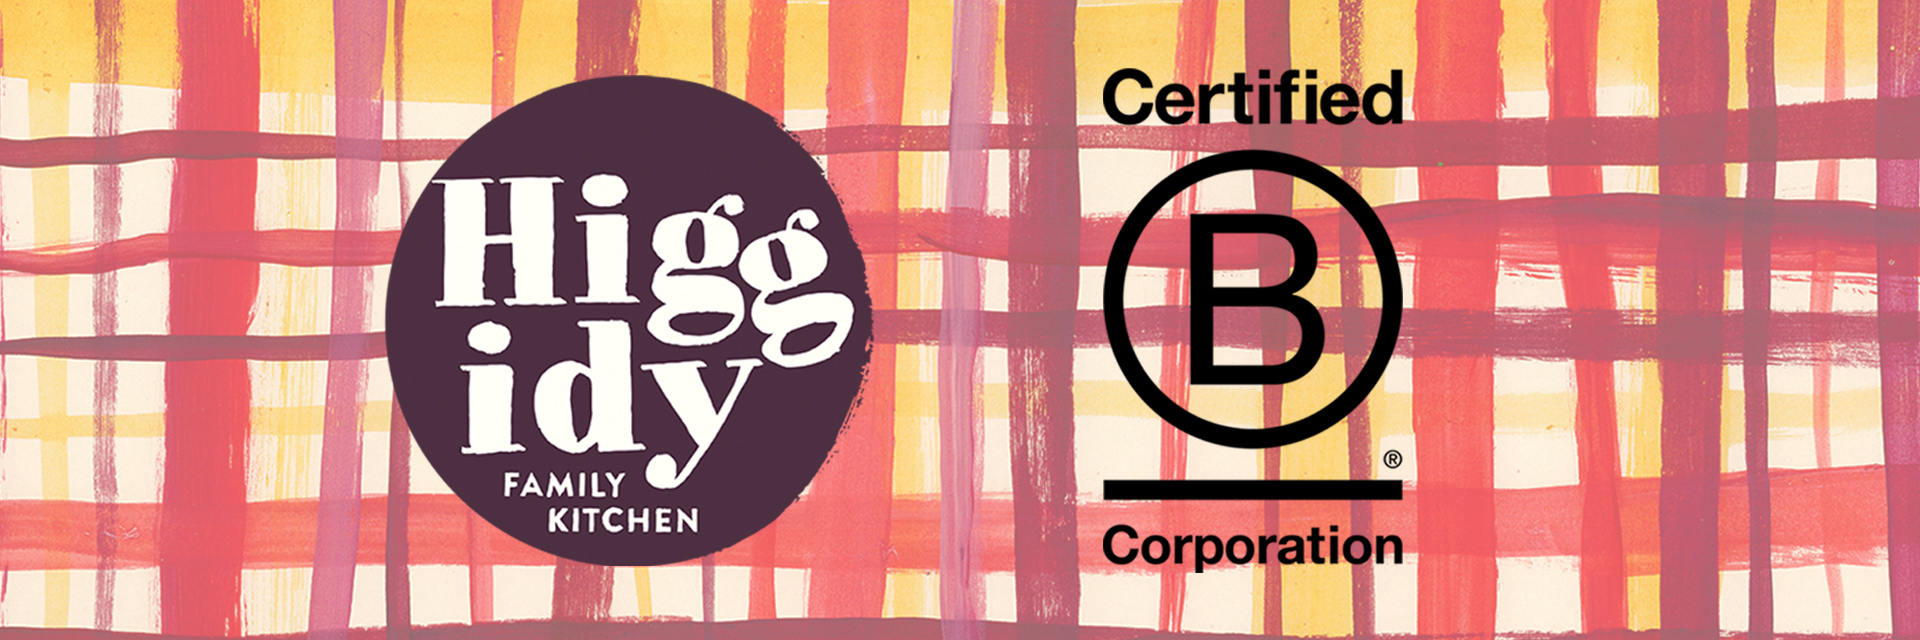 Banner Image of the Higgidy and B Corp logo together